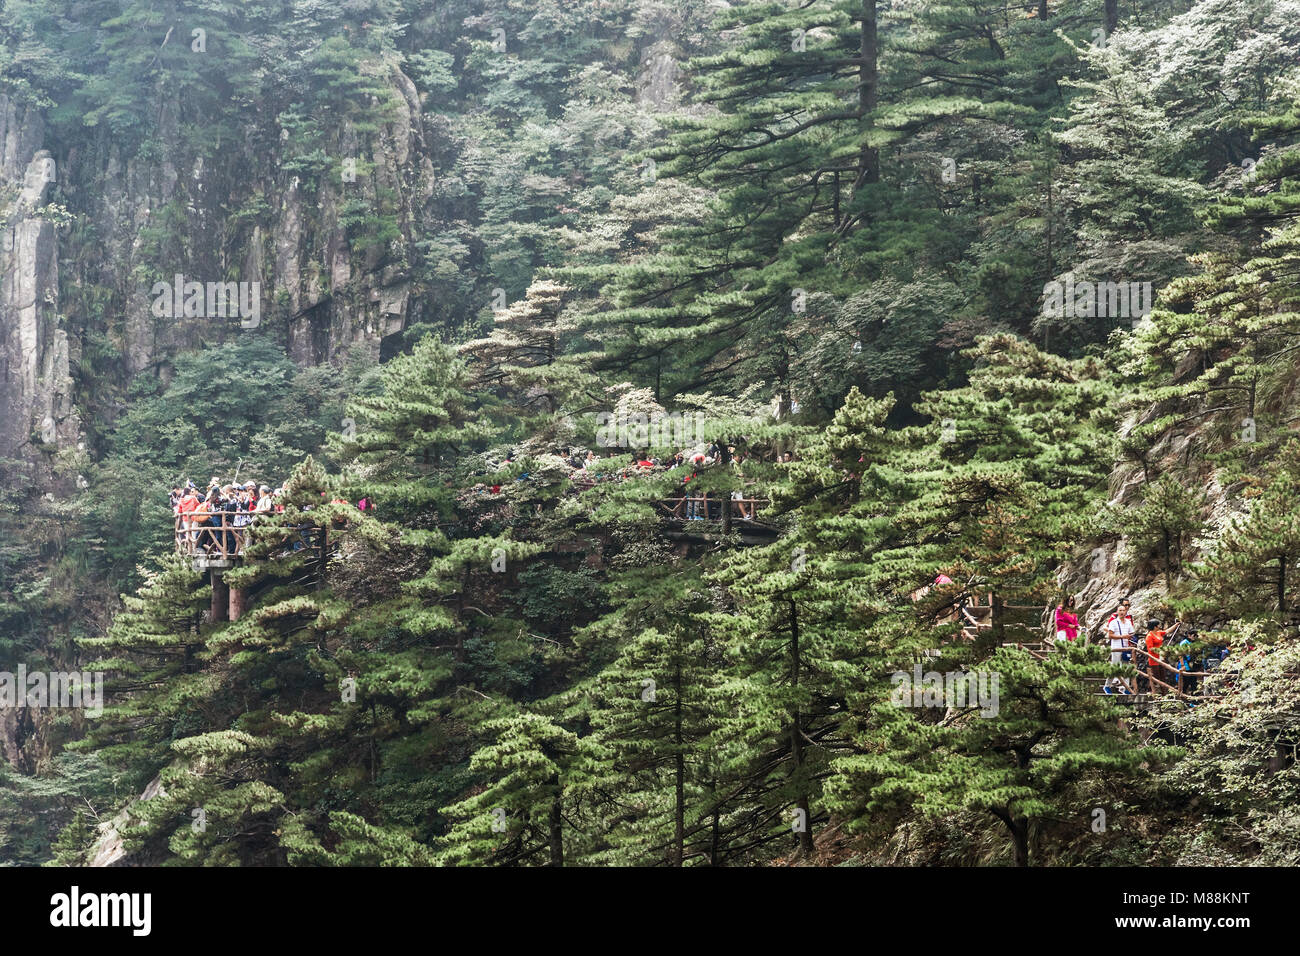 Chinese tourists on a walkway in Huangshan National Park, Anhui Province, China Stock Photo